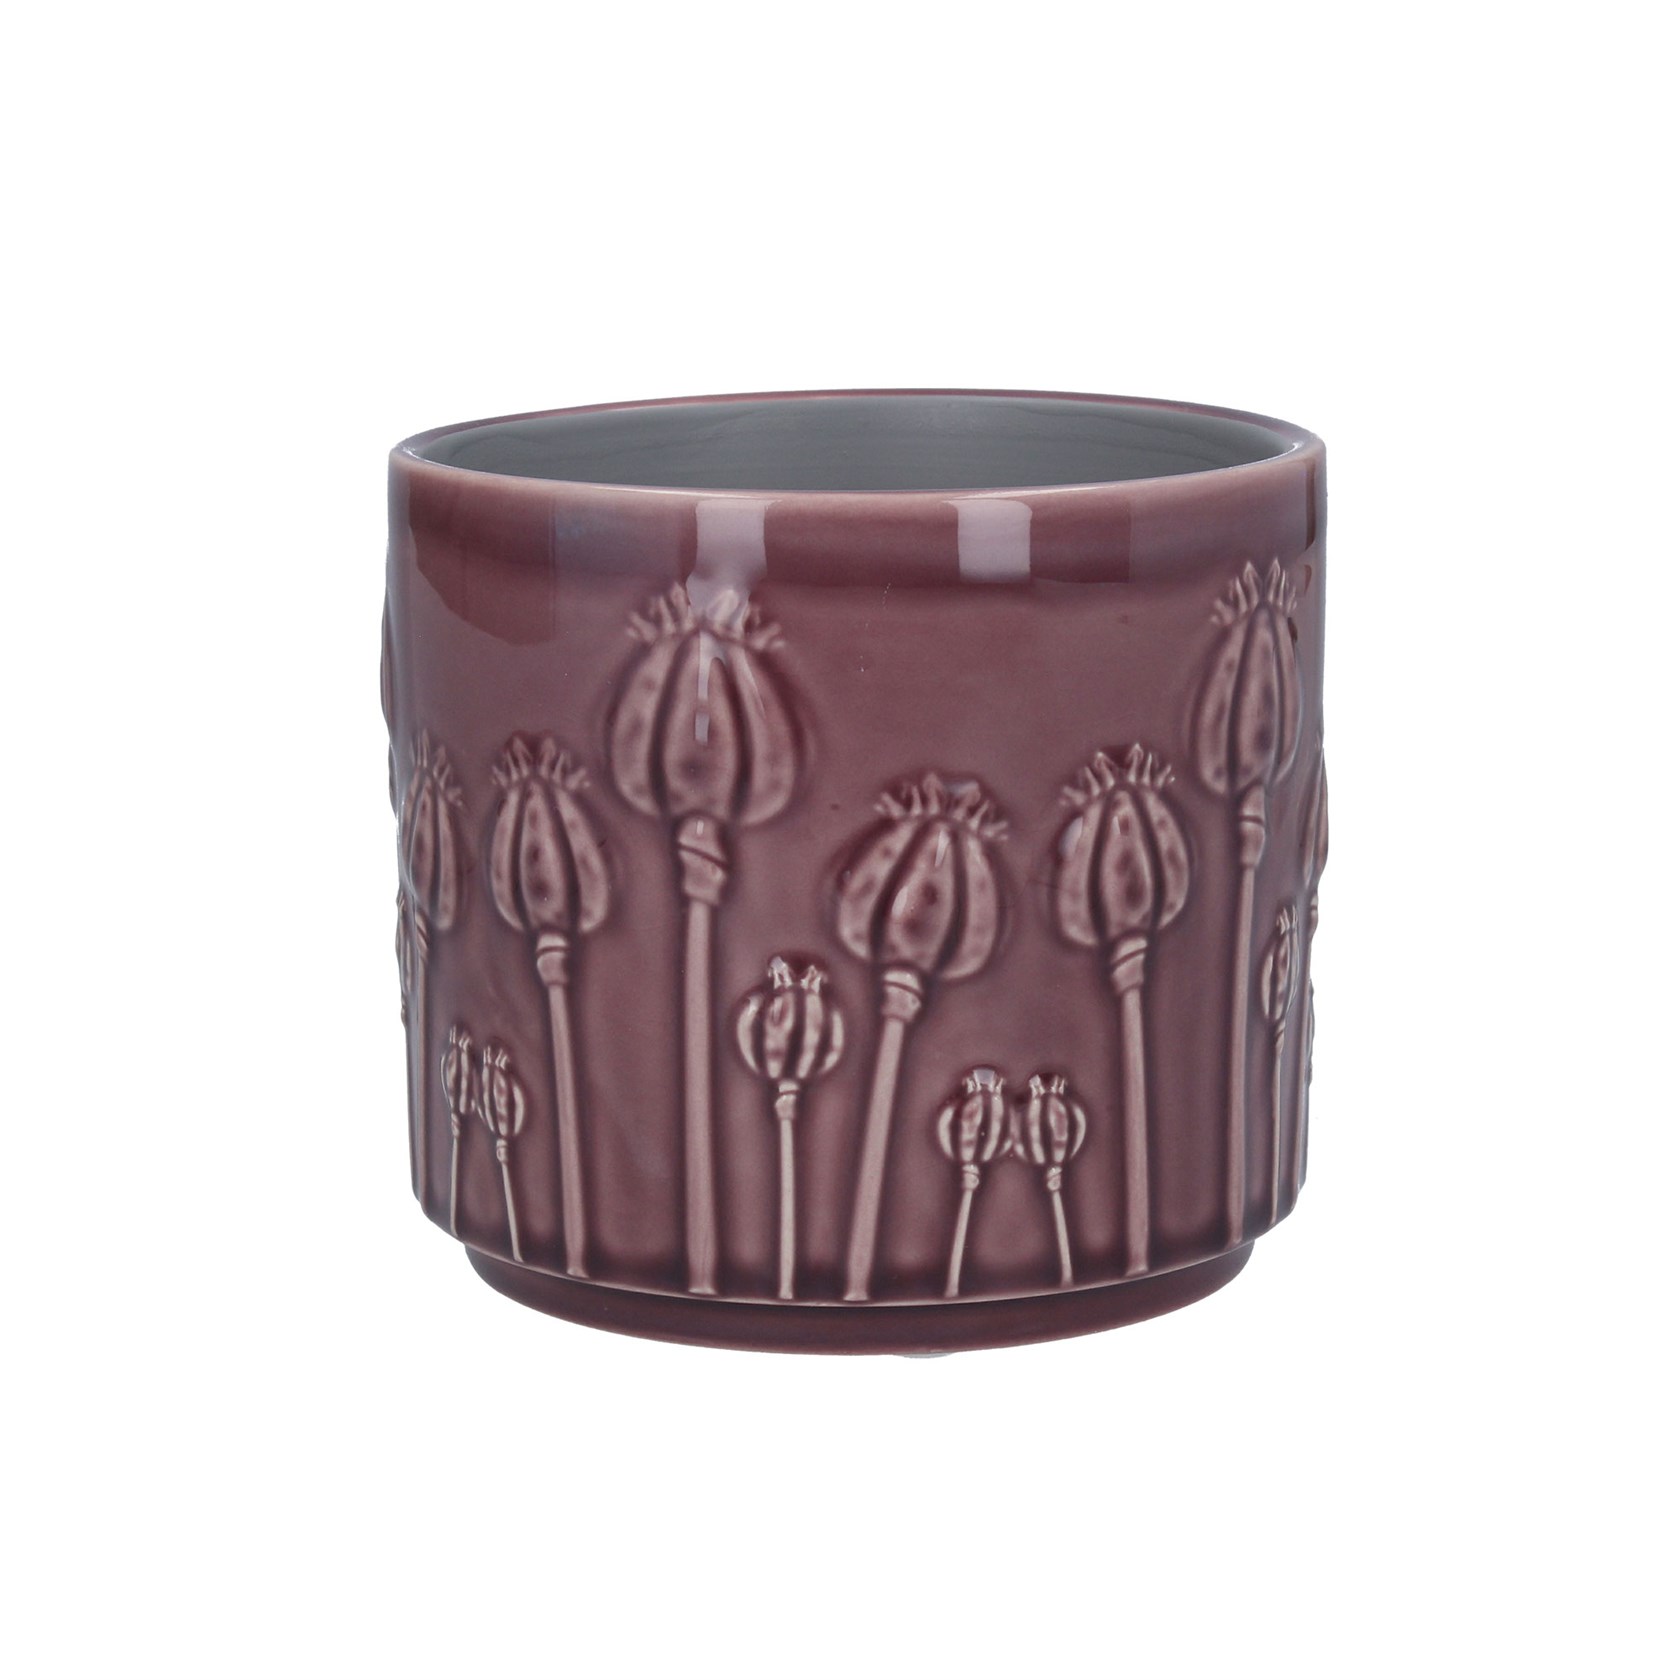 A small purple coloured ceramic pot cover with all over poppy design. The perfect addition to your home or the perfect gift for yourself or a loved one. By London designer Gisela Graham.